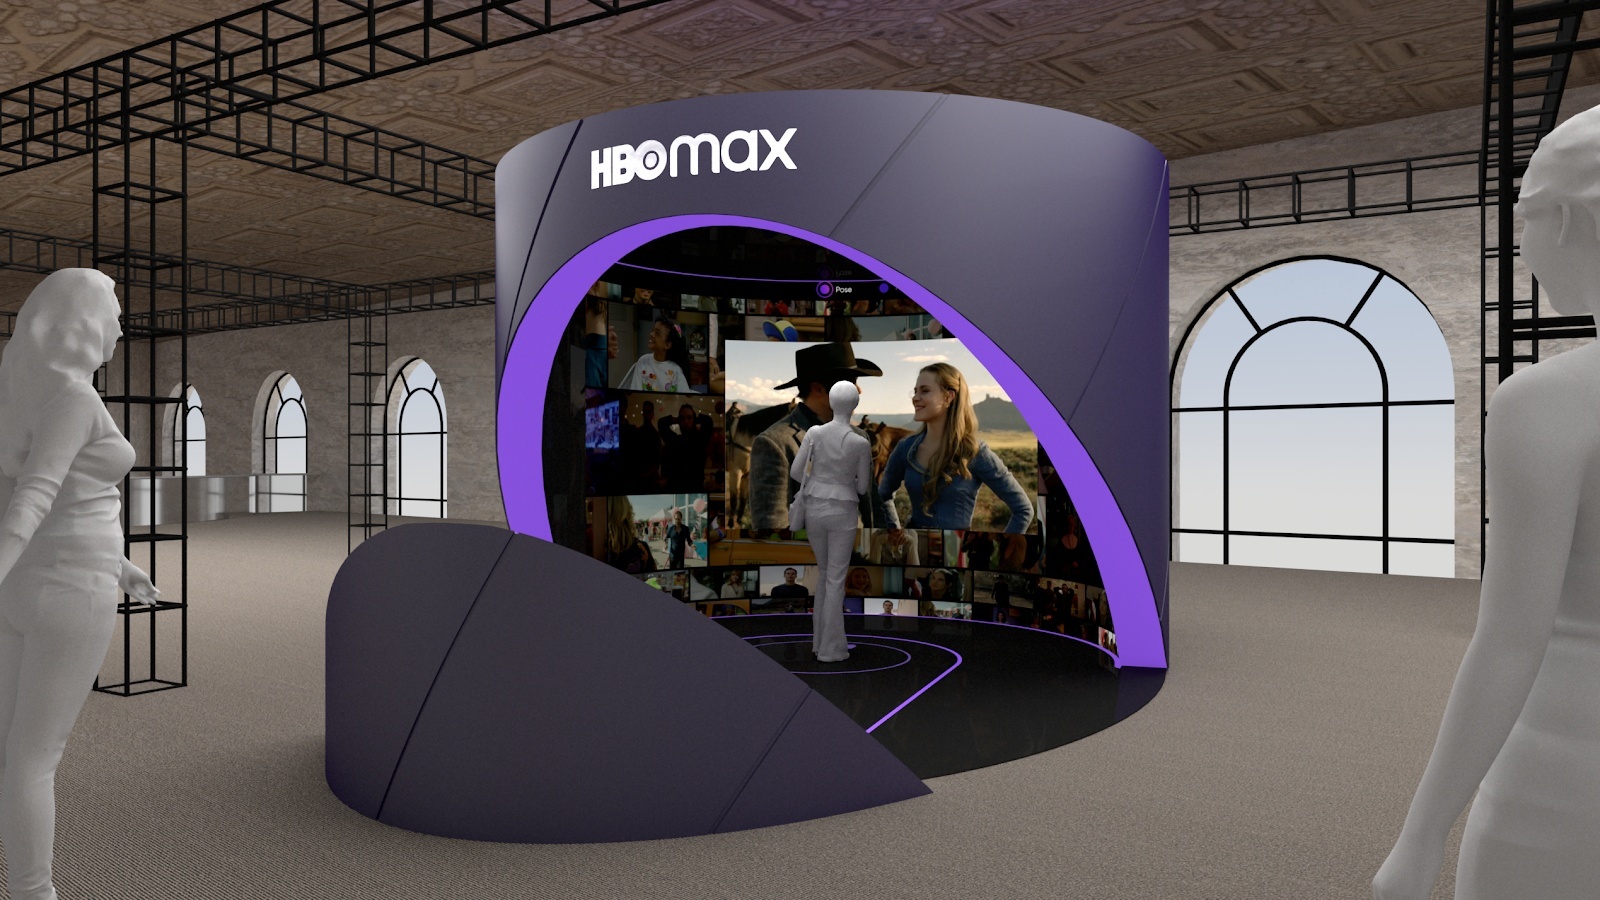 The Orbit is a kiosk experience that users interact with to access the history of HBO